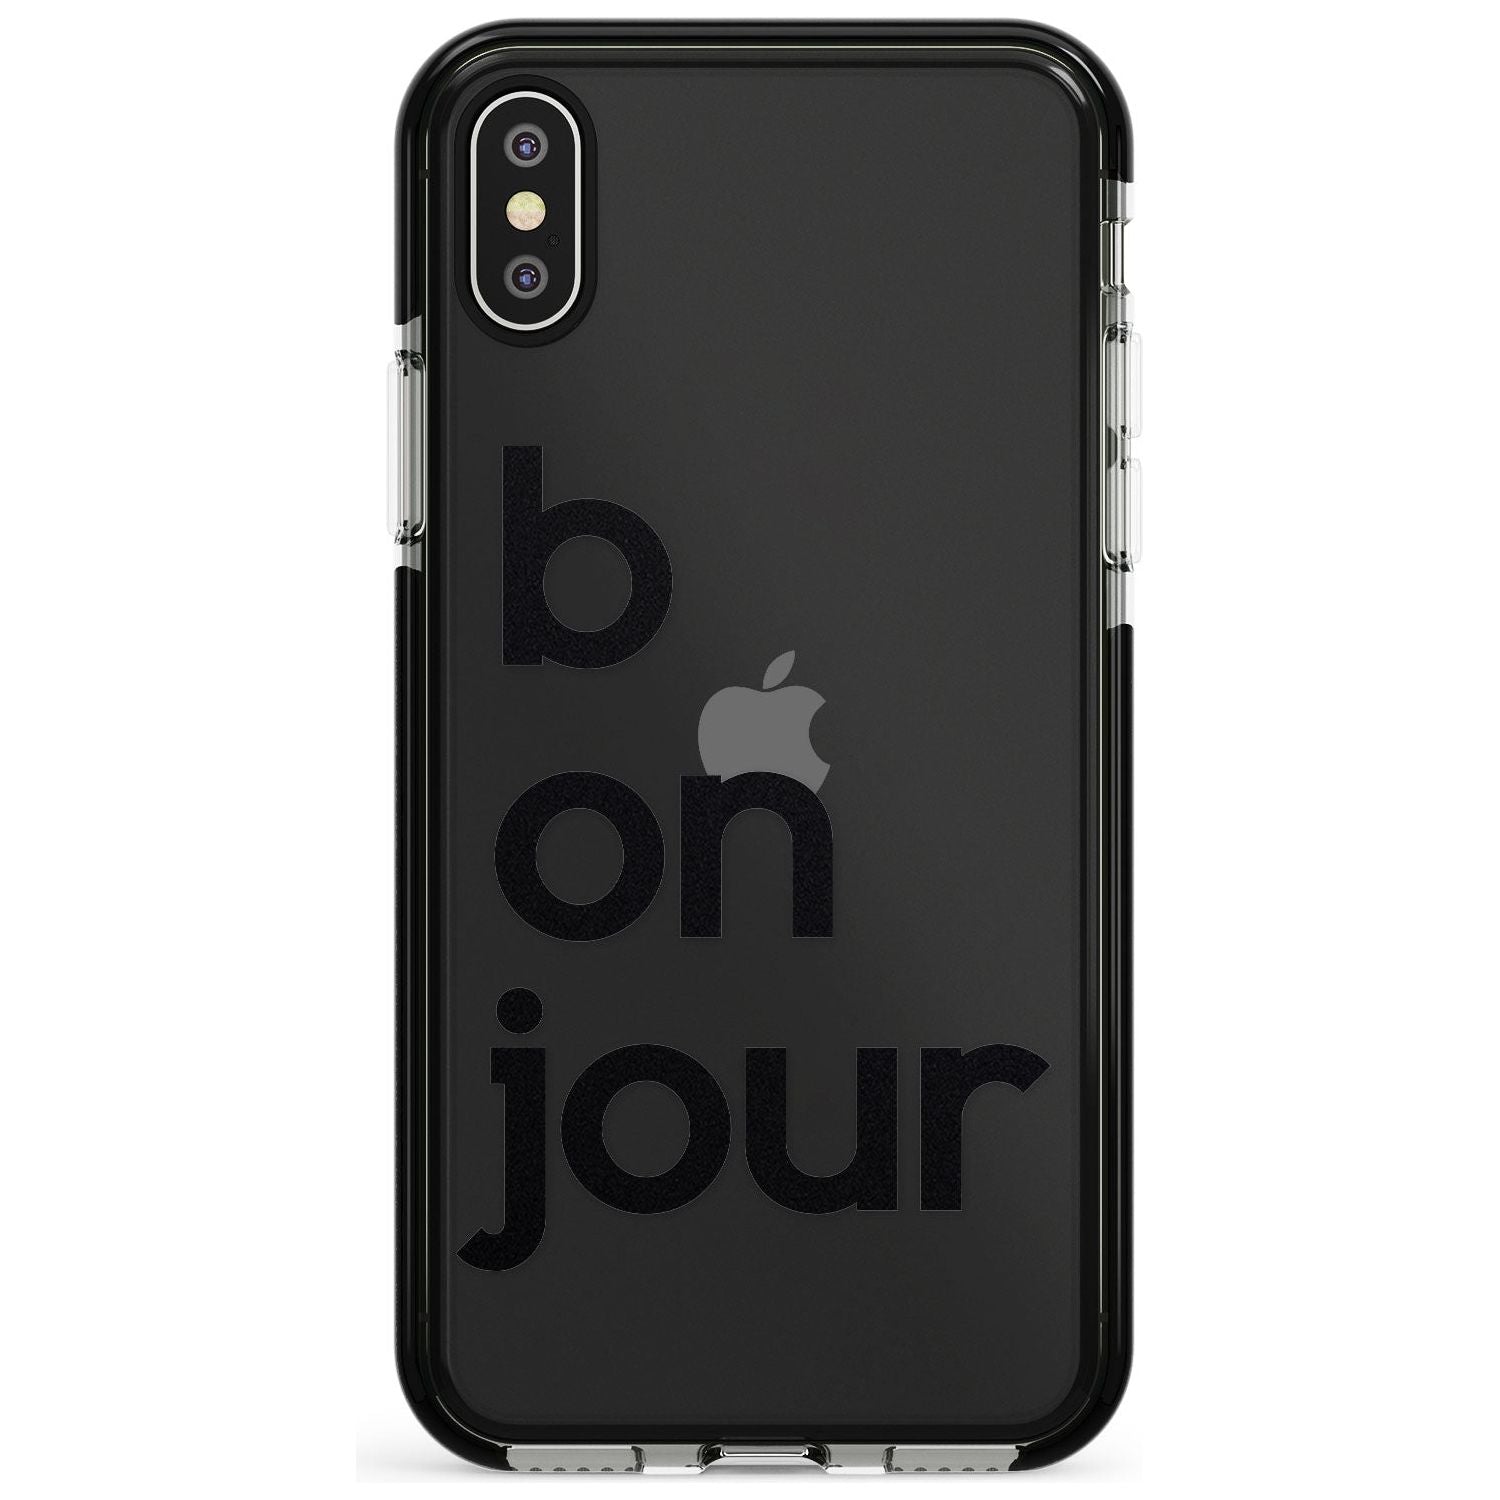 Bonjour Pink Fade Impact Phone Case for iPhone X XS Max XR